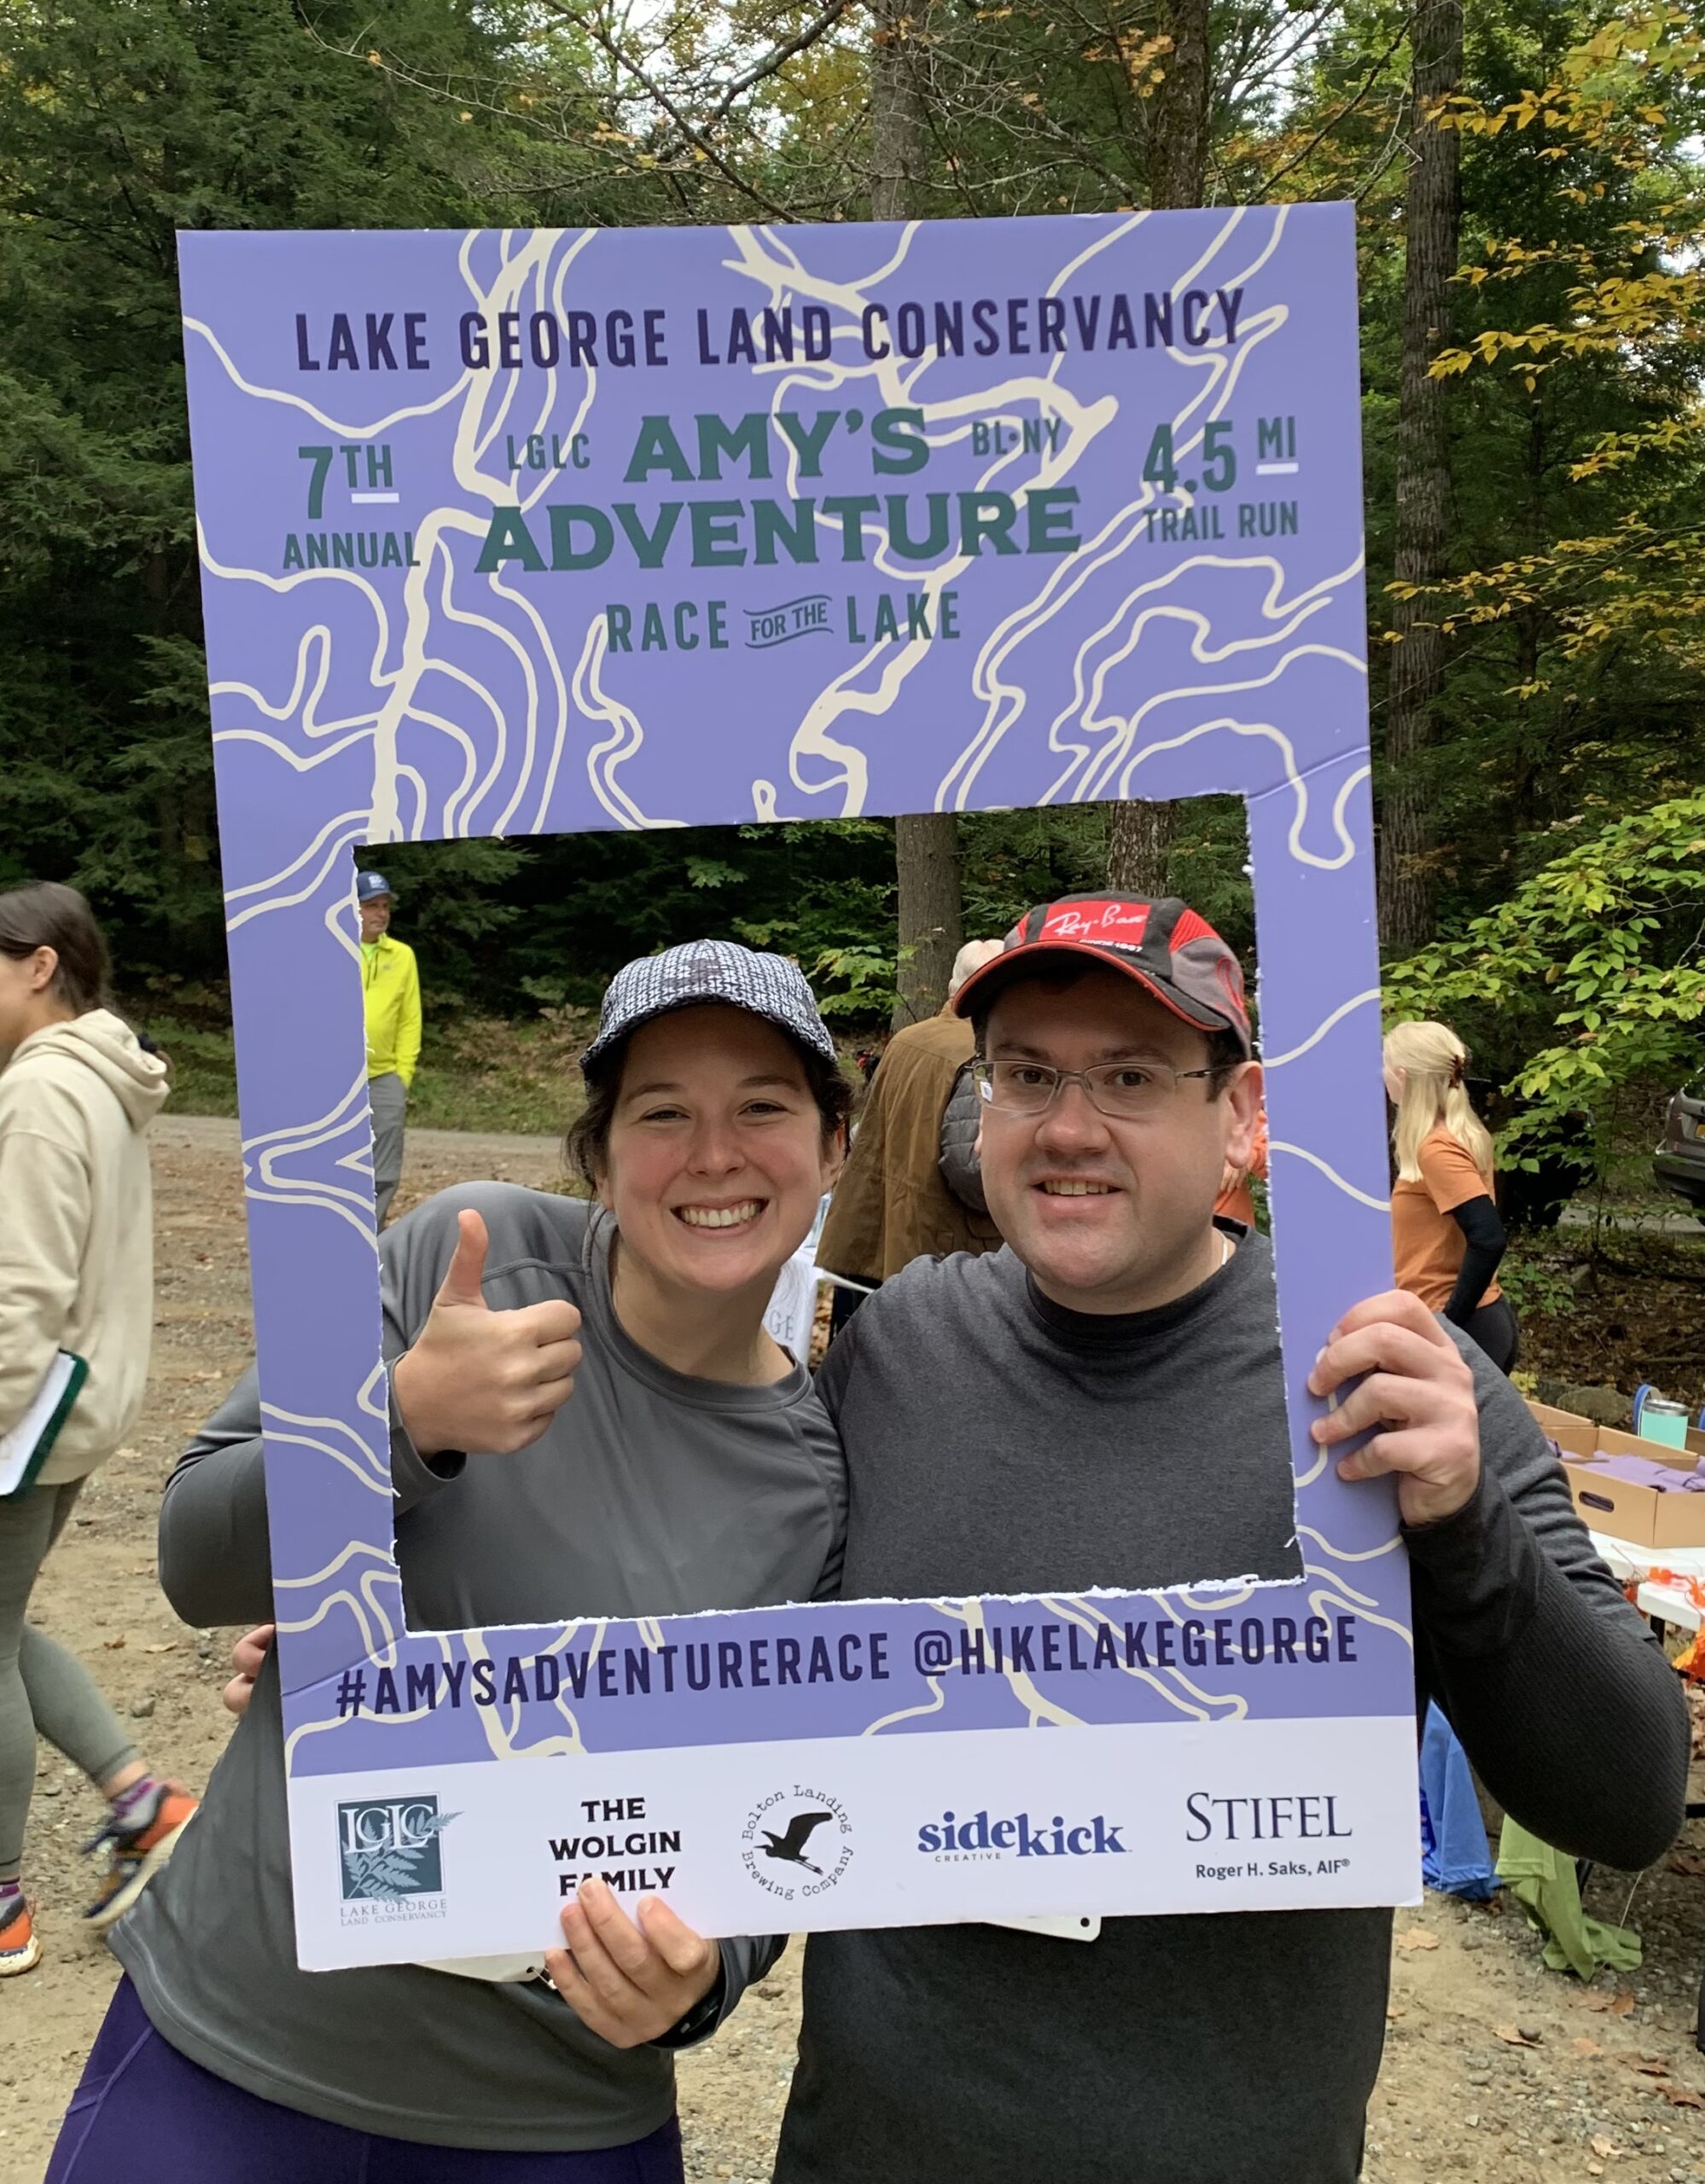 A couple posing with a sign for the Lake George Land Conservancy featuring Amy's Adventure Race for The Lake.